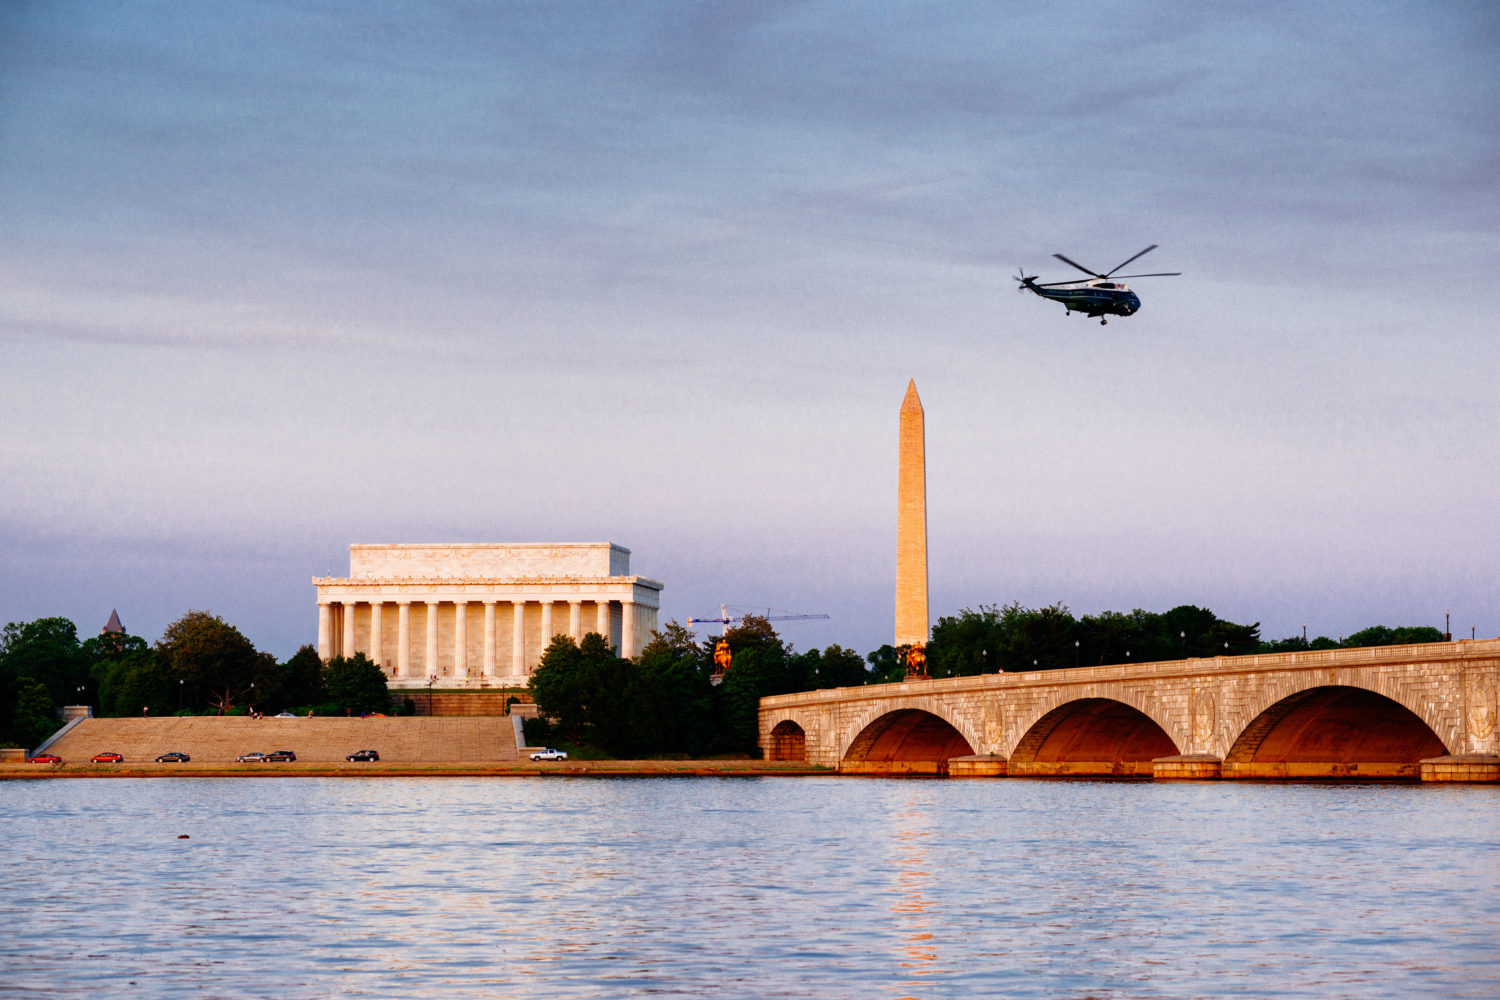 Helicopter flies over DC.